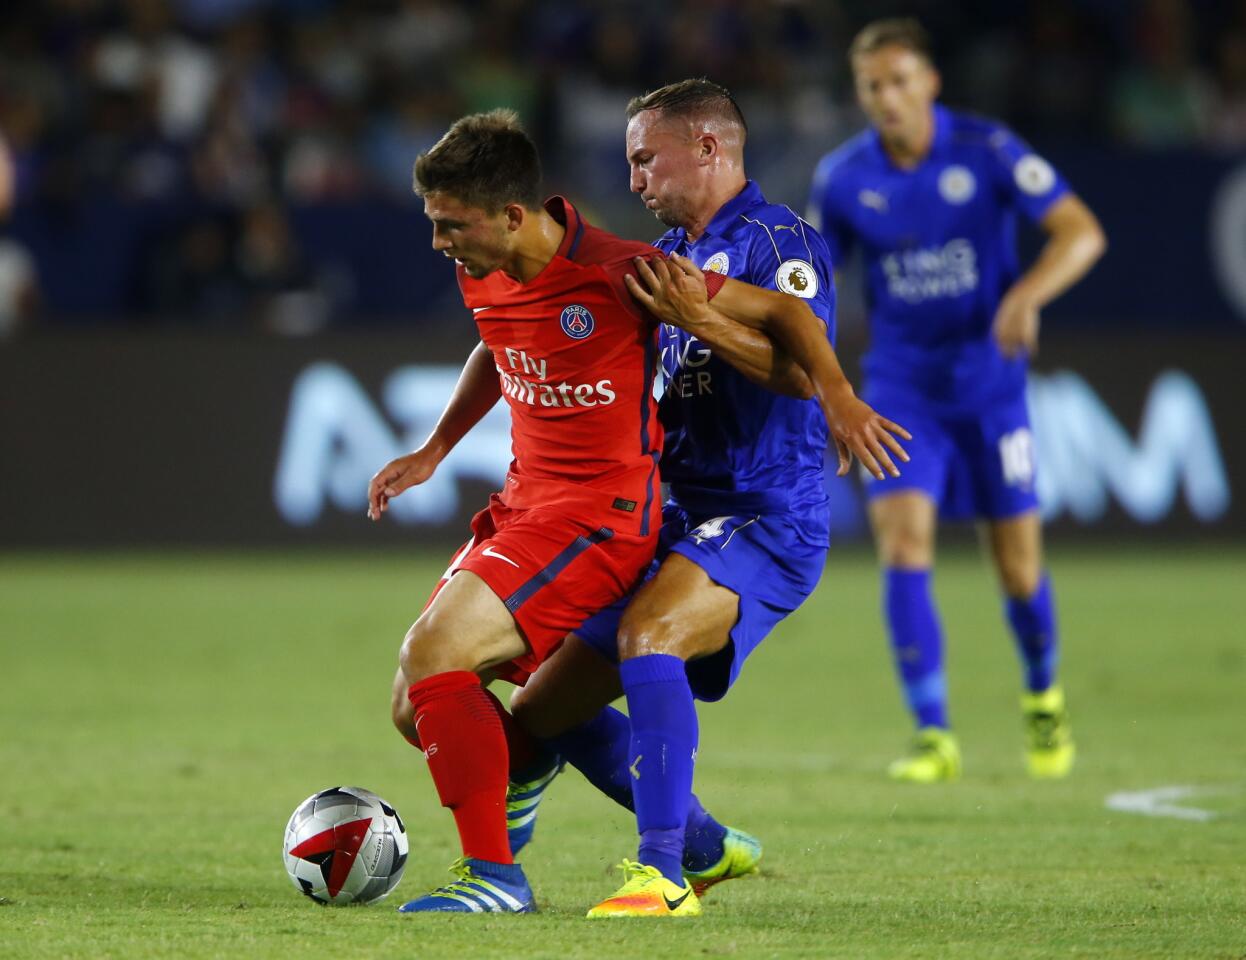 Football - Paris St Germain v Leicester City - International Champions Cup - StubHub Center, Carson, California - 30/7/16 Paris St Germain's Lorenzo Callegari (L) in action with Leicester City's Danny Drinkwater Reuters / Mike Blake Livepic ** Usable by SD ONLY **